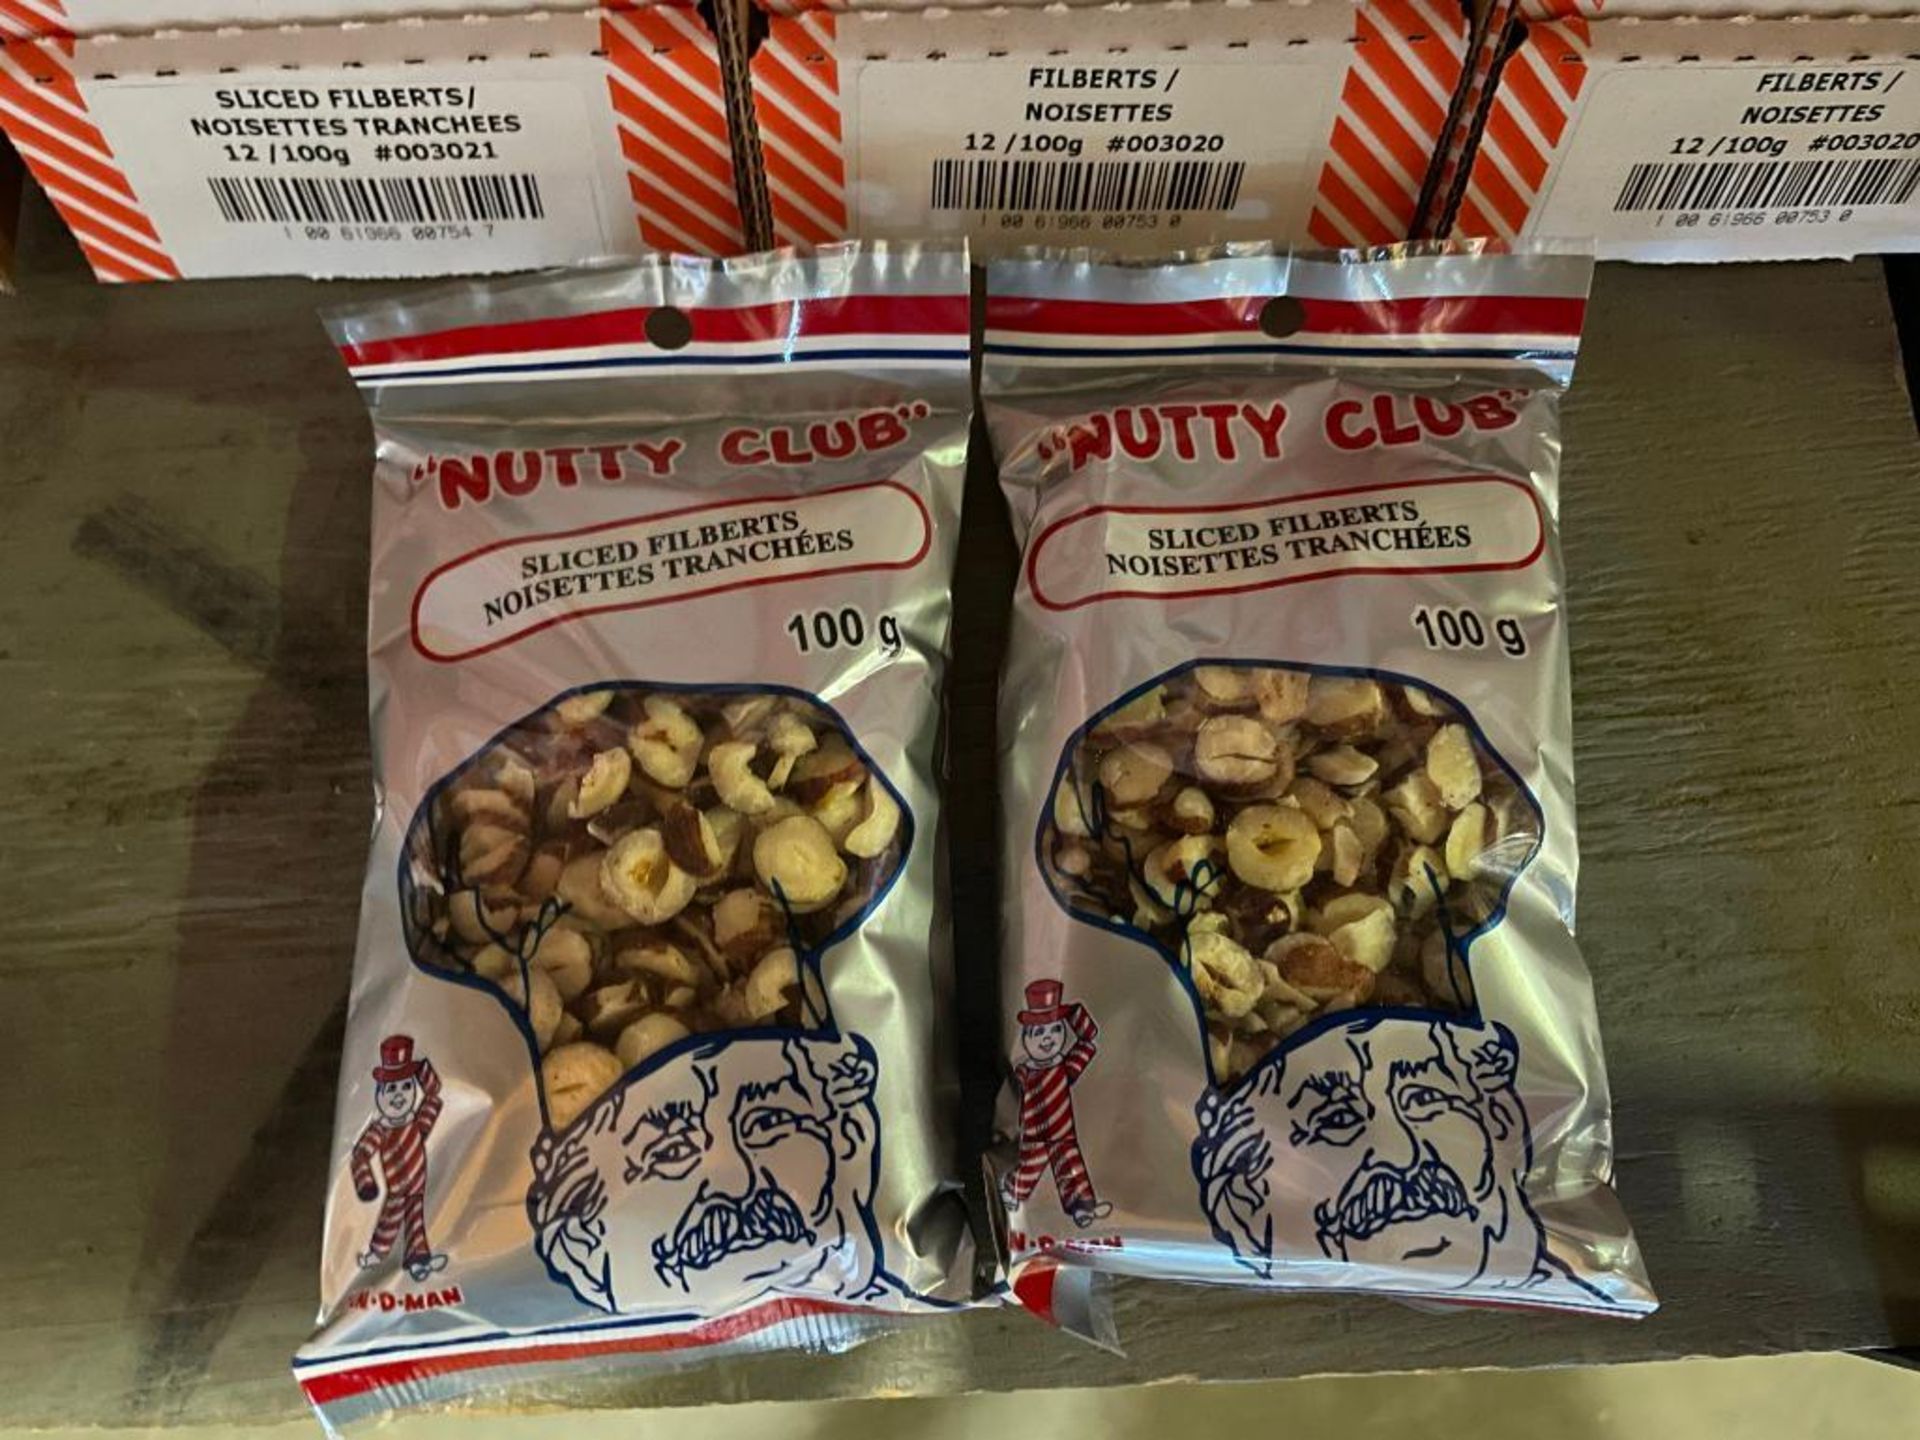 (8) BOXES OF NUTTY CLUB FLIBERTS, 12/100G BAGS PER BOX - Image 2 of 2